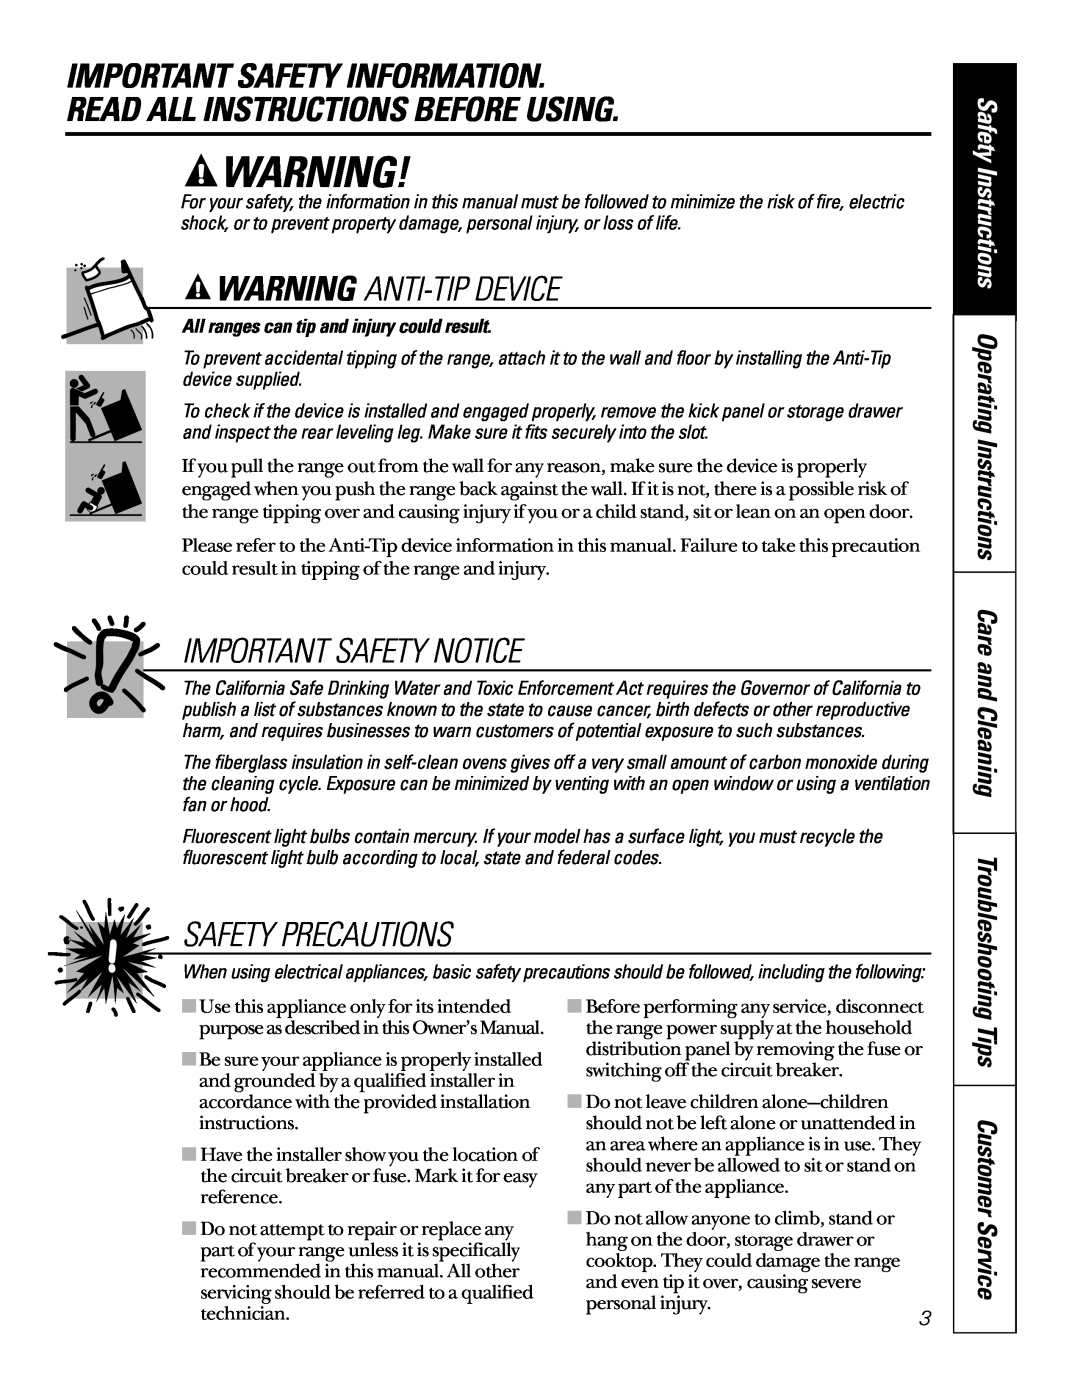 Sharp JB965 Important Safety Information, Read All Instructions Before Using, Warning Anti-Tipdevice, Safety Precautions 